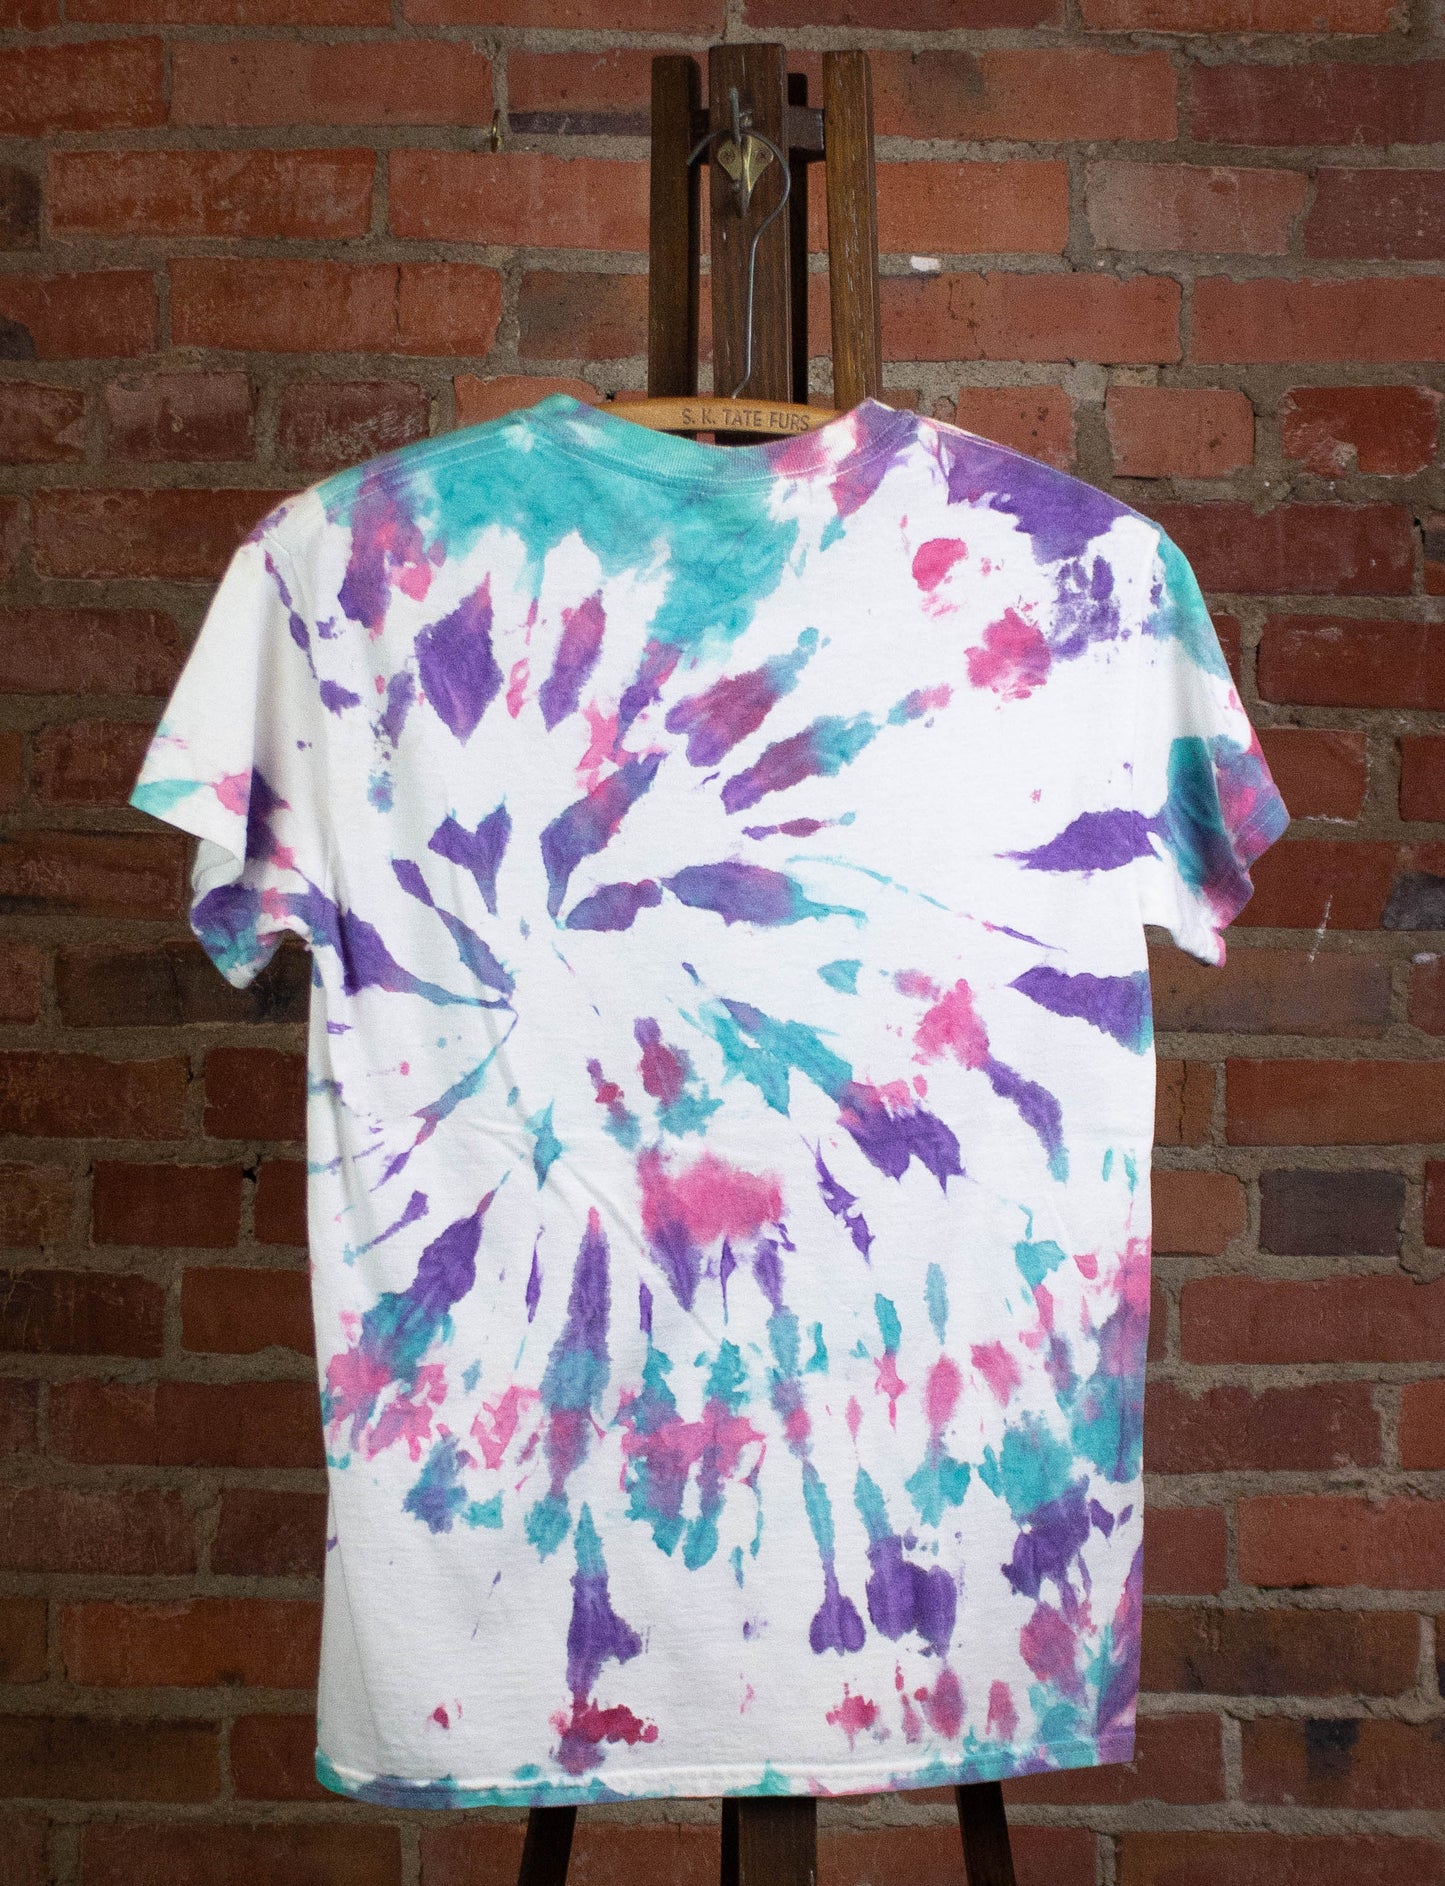 Stop Fucking The Planet Tie Die T Shirt Purple Pink and Blue Small